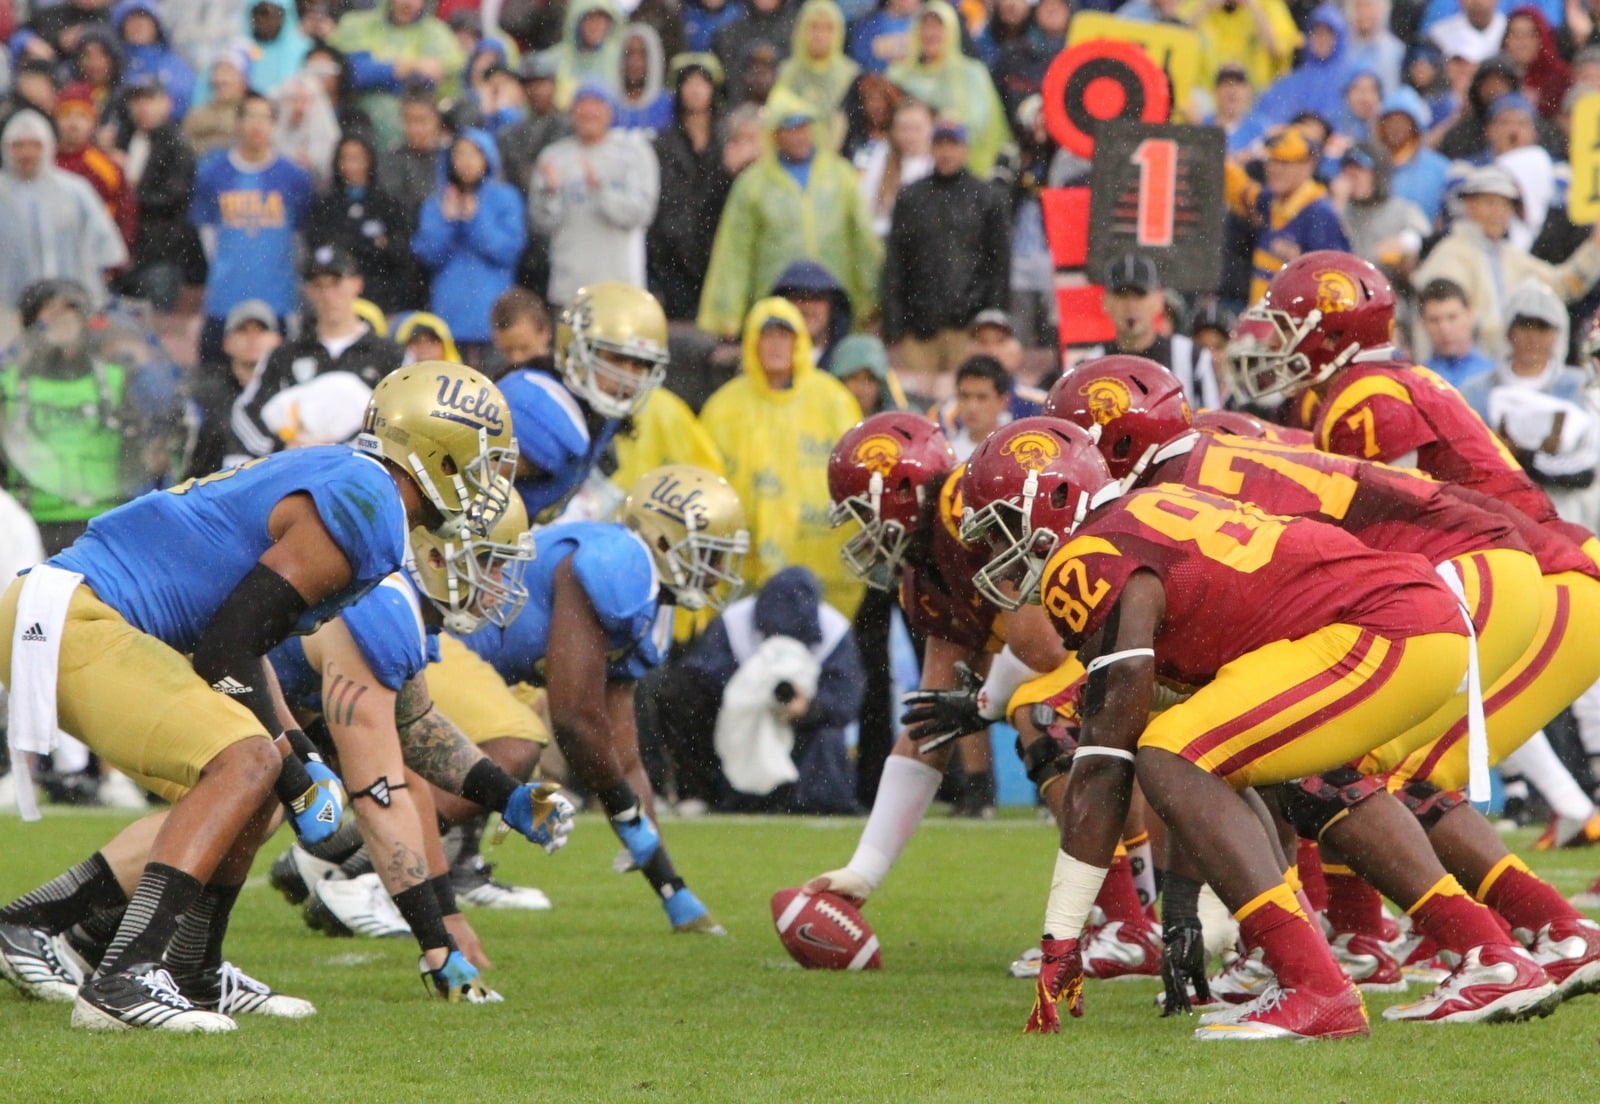 Top Five UCLA vs USC Football Games From the Last 25 Years